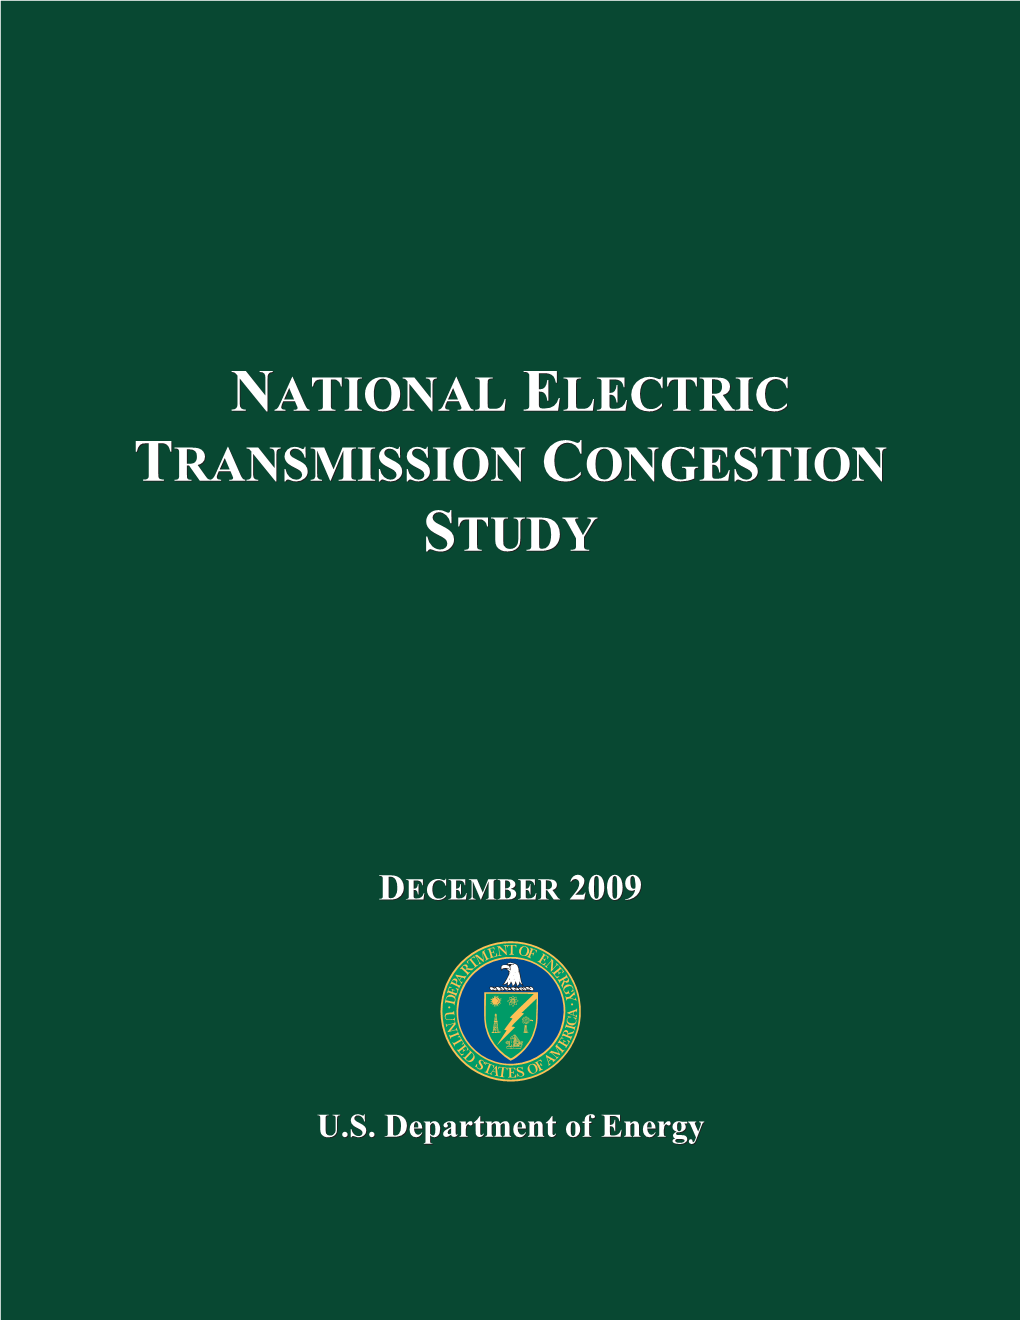 Full Text of the National Electric Transmission Congestion Study 2009